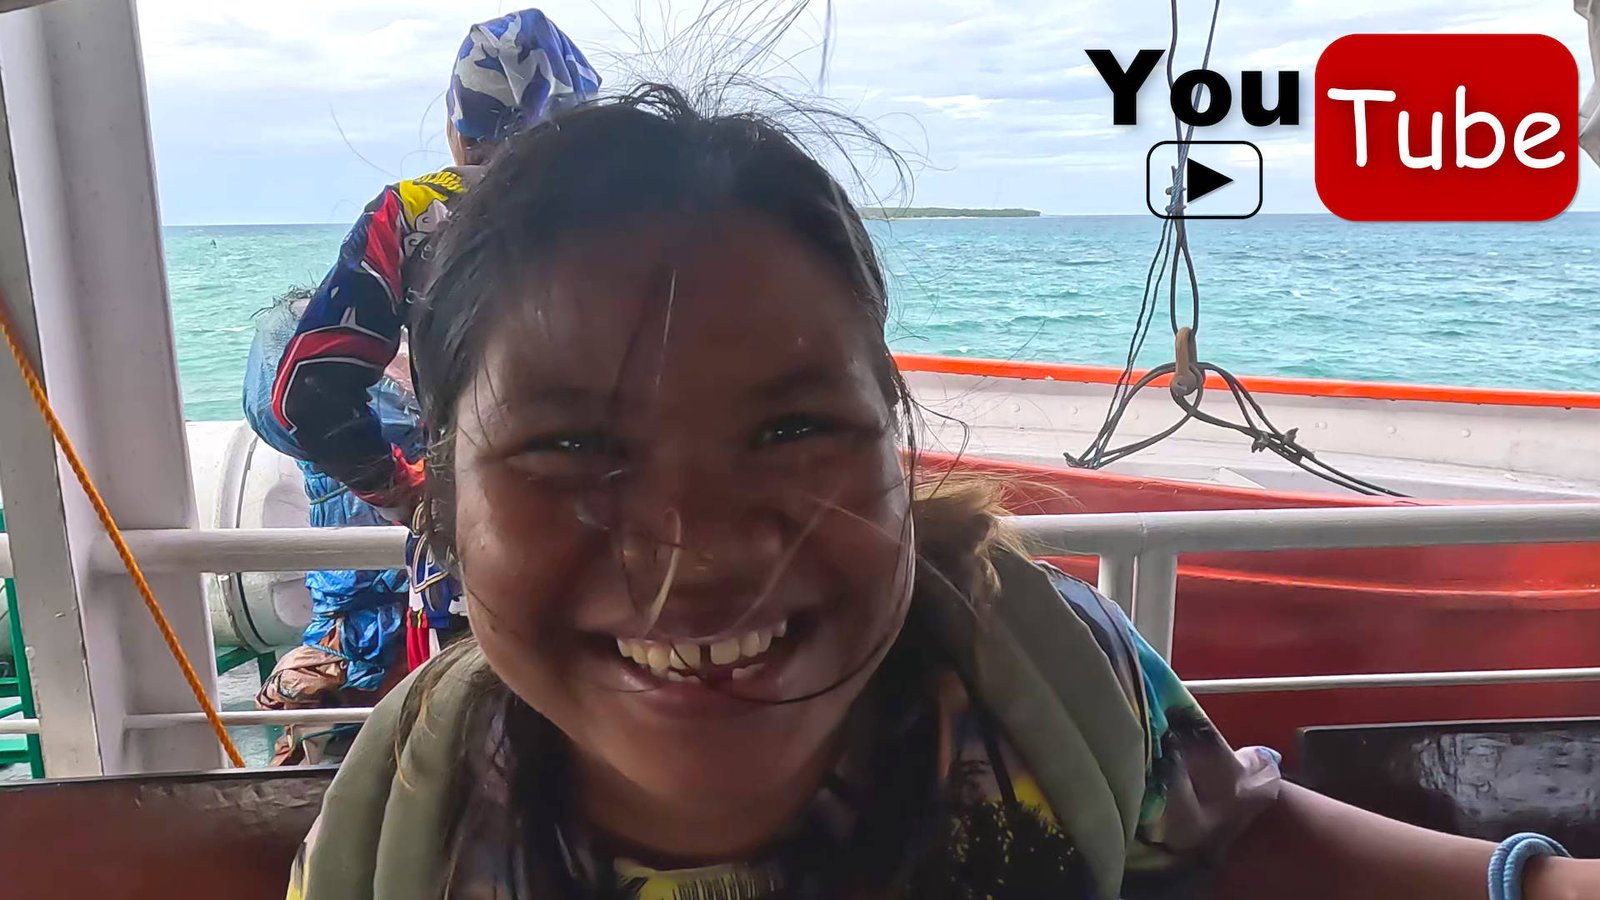 Time to move on. This is our last days on Bantayan Island. Video